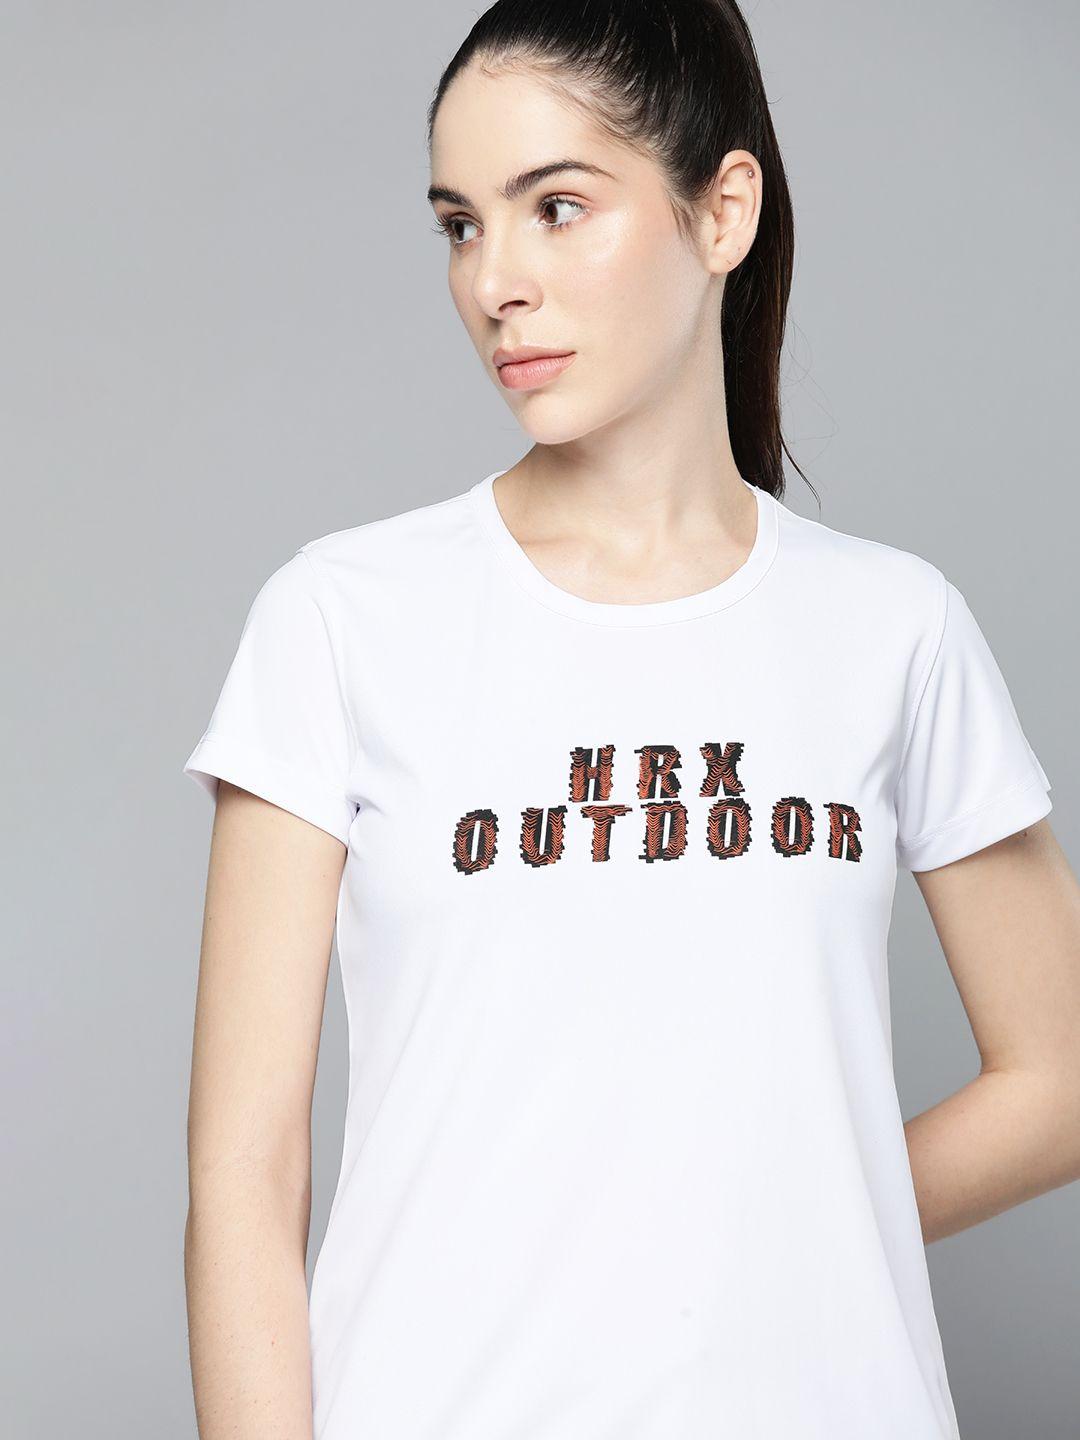 hrx by hrithik roshan women brand logo printed rapid-dry t-shirt with reflective detail